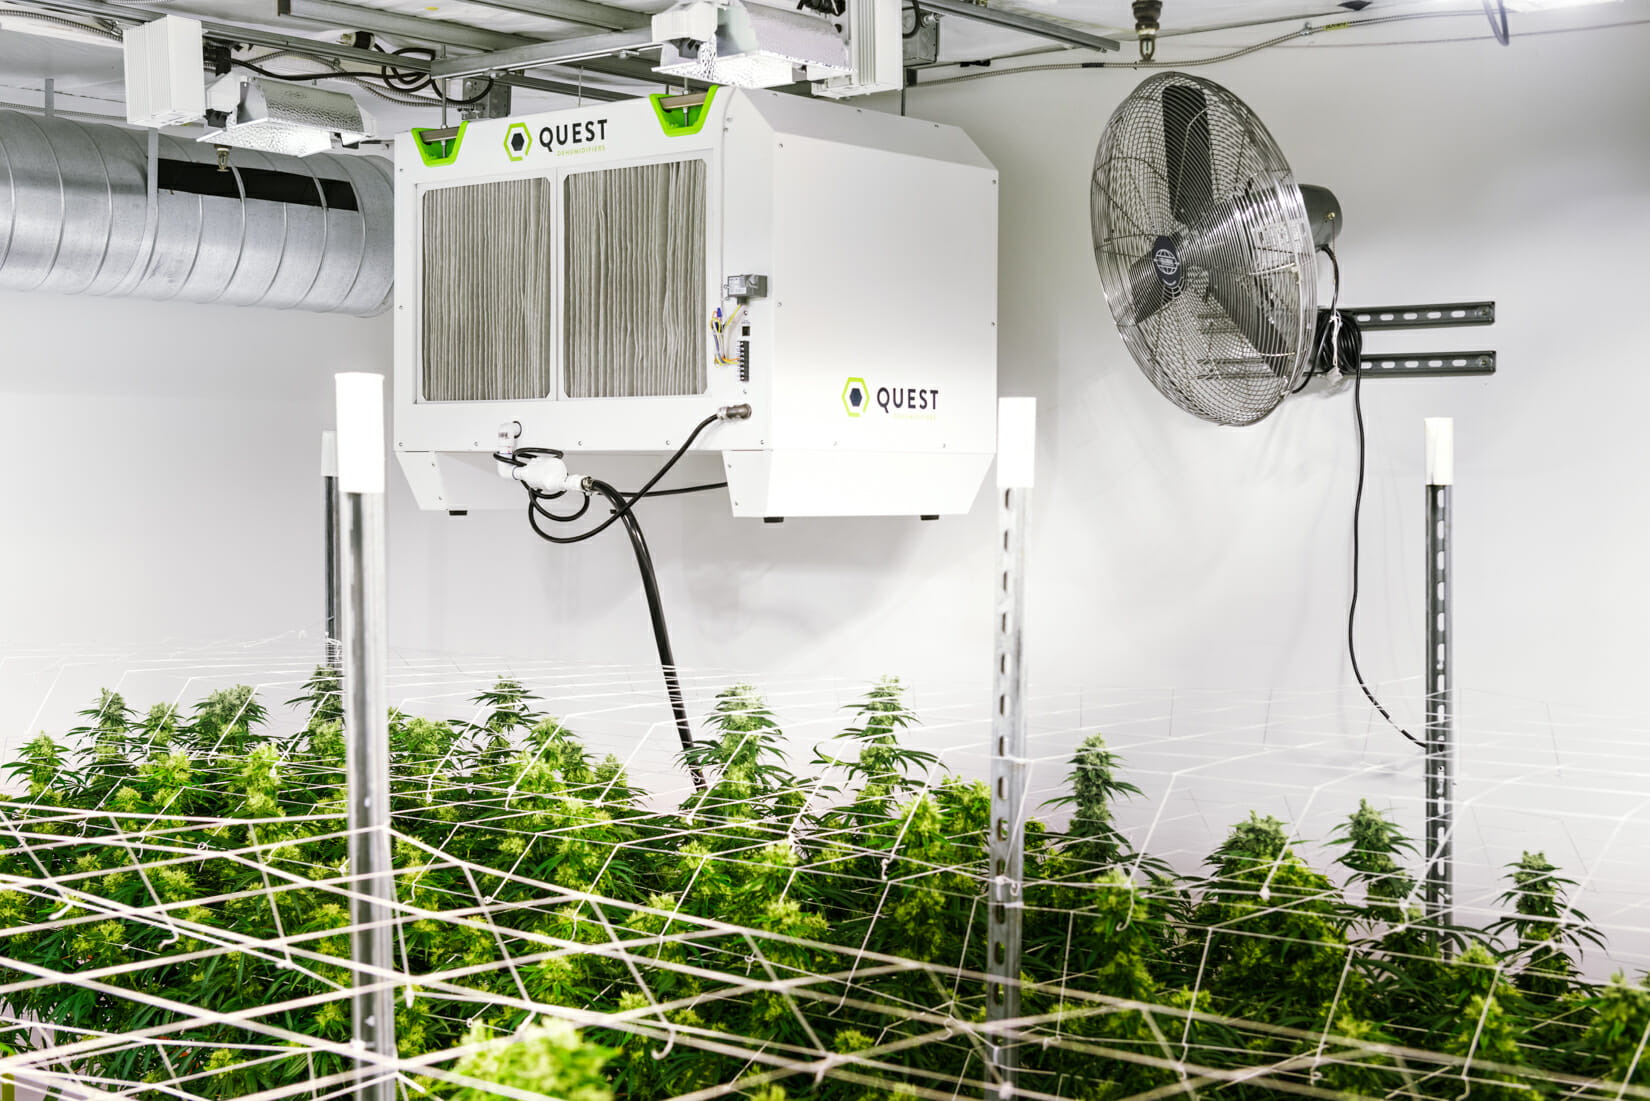 The Quest 506 is a large-capacity dehumidifier used in cannabis grow rooms.